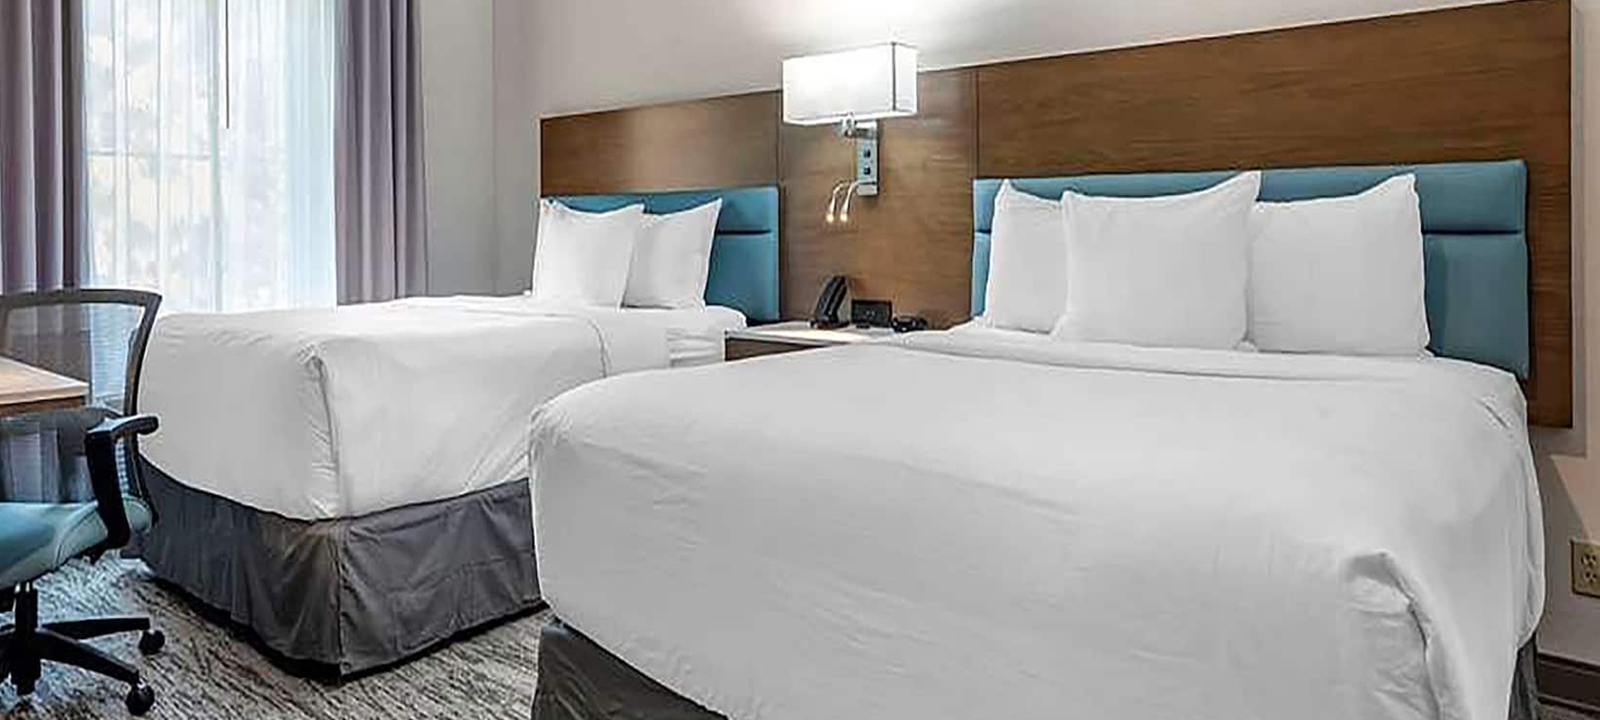 TRYP by Wyndham Tallahassee North